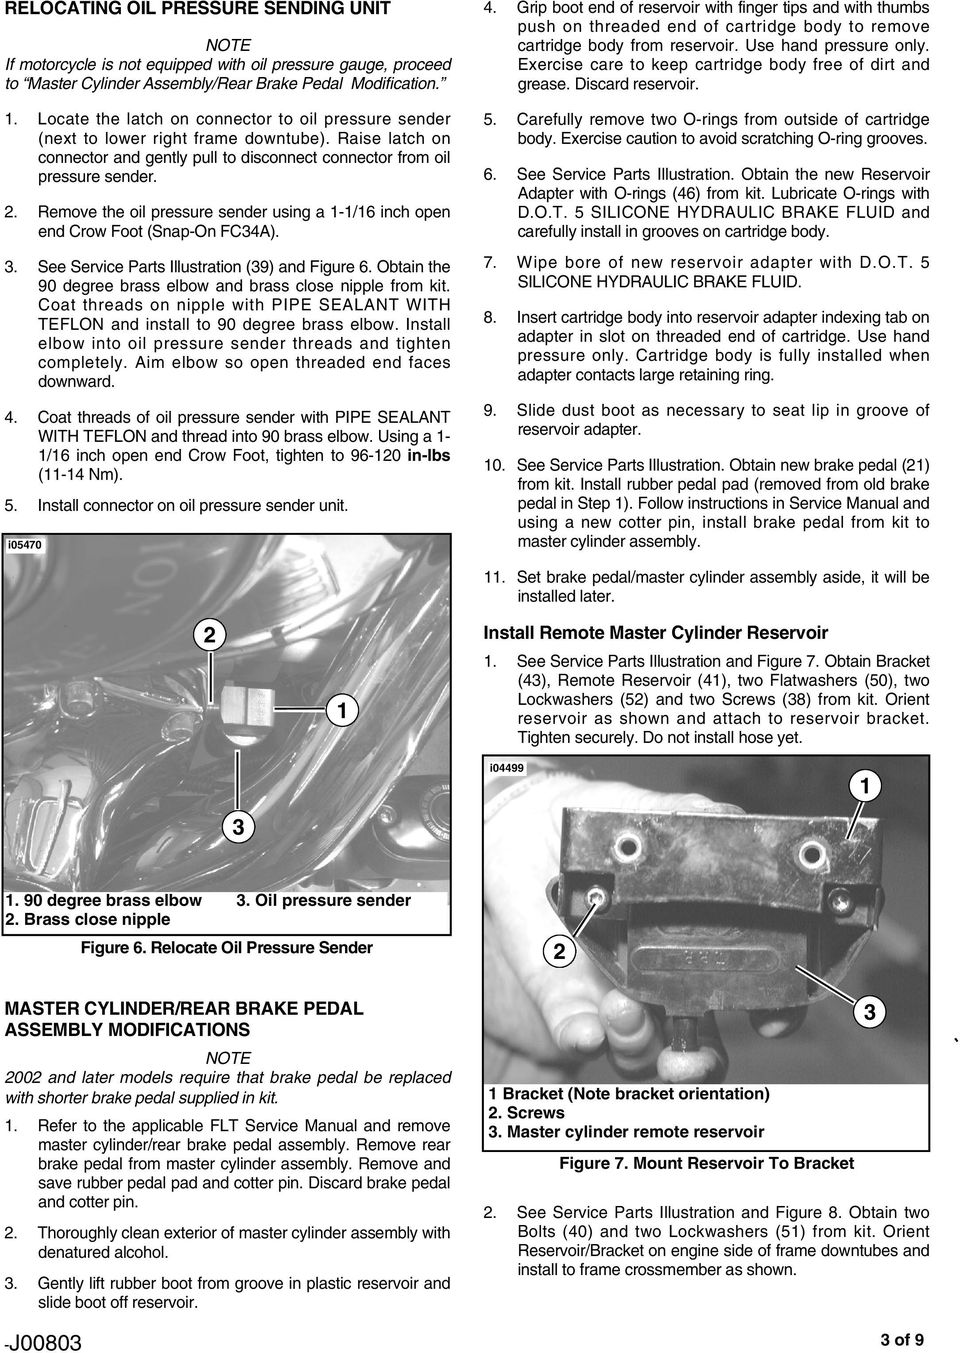 . Remove the oil pressure sender using a -/6 inch open end Crow Foot (Snap-On FC4A).. See Service Parts Illustration (9) and Figure 6. Obtain the 90 degree brass elbow and brass close nipple from kit.